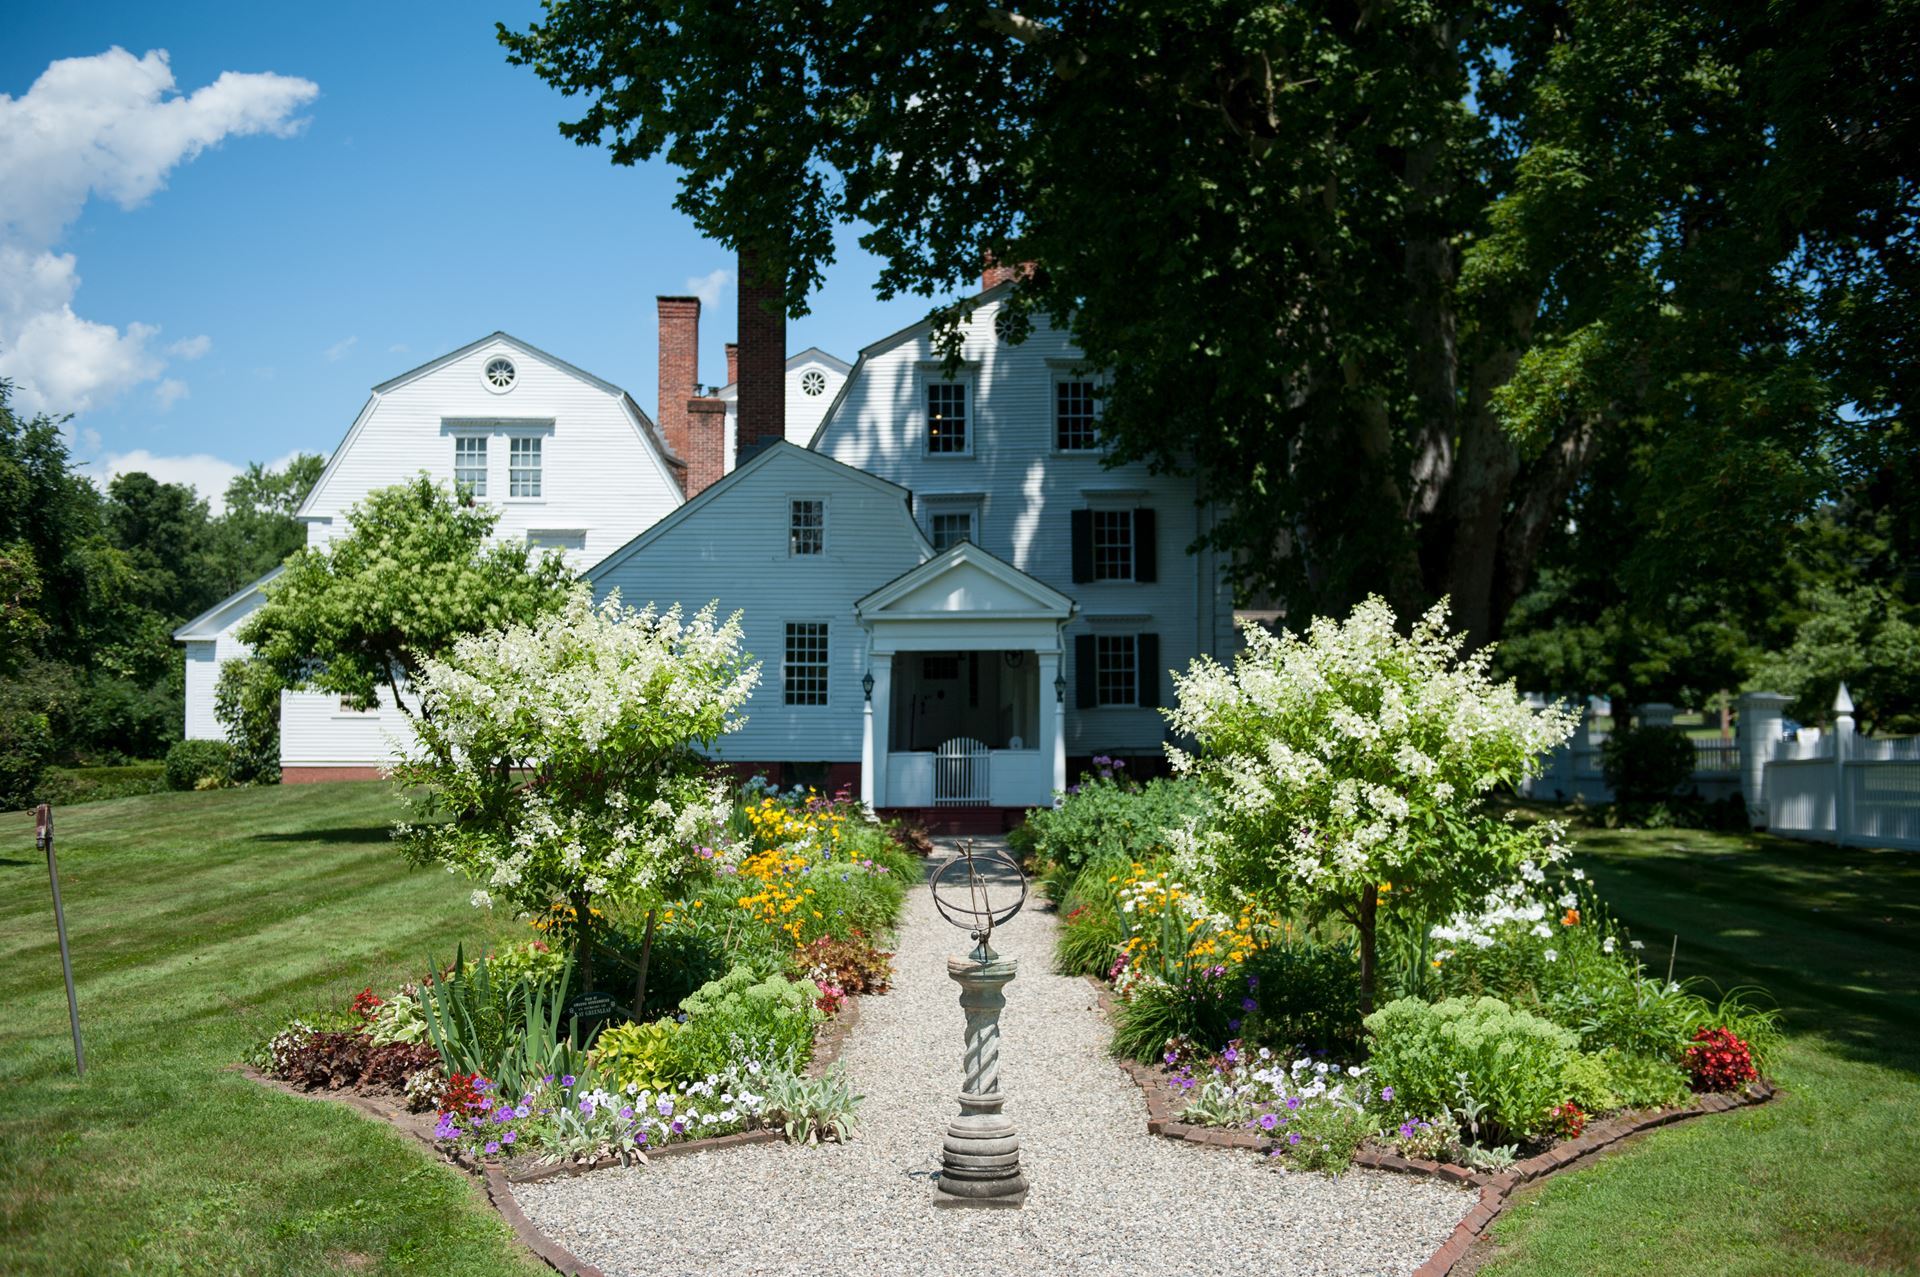 Gardens at the Phelps-Hathaway House